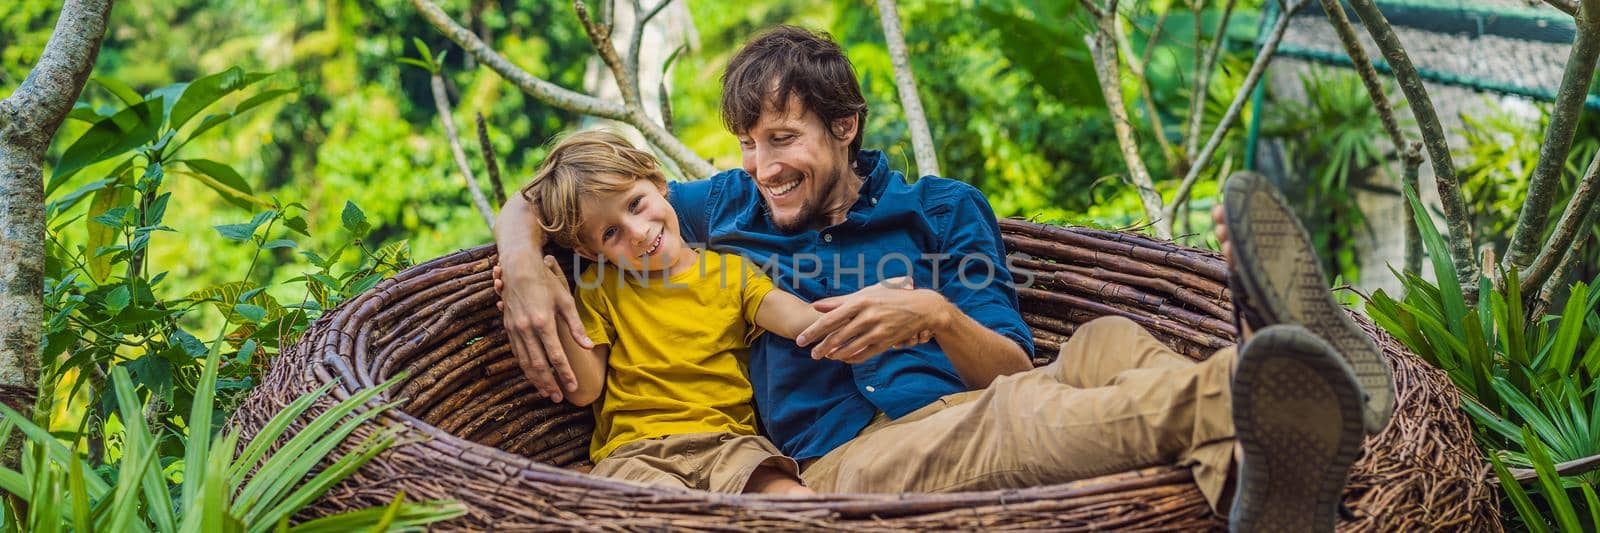 BANNER, LONG FORMAT Bali trend, straw nests everywhere. Child friendly place. Happy family enjoying their travel around Bali island, Indonesia. Making a stop on a beautiful hill. Photo in a straw nest, natural environment. Lifestyle. Traveling with kids concept. What to do with children.